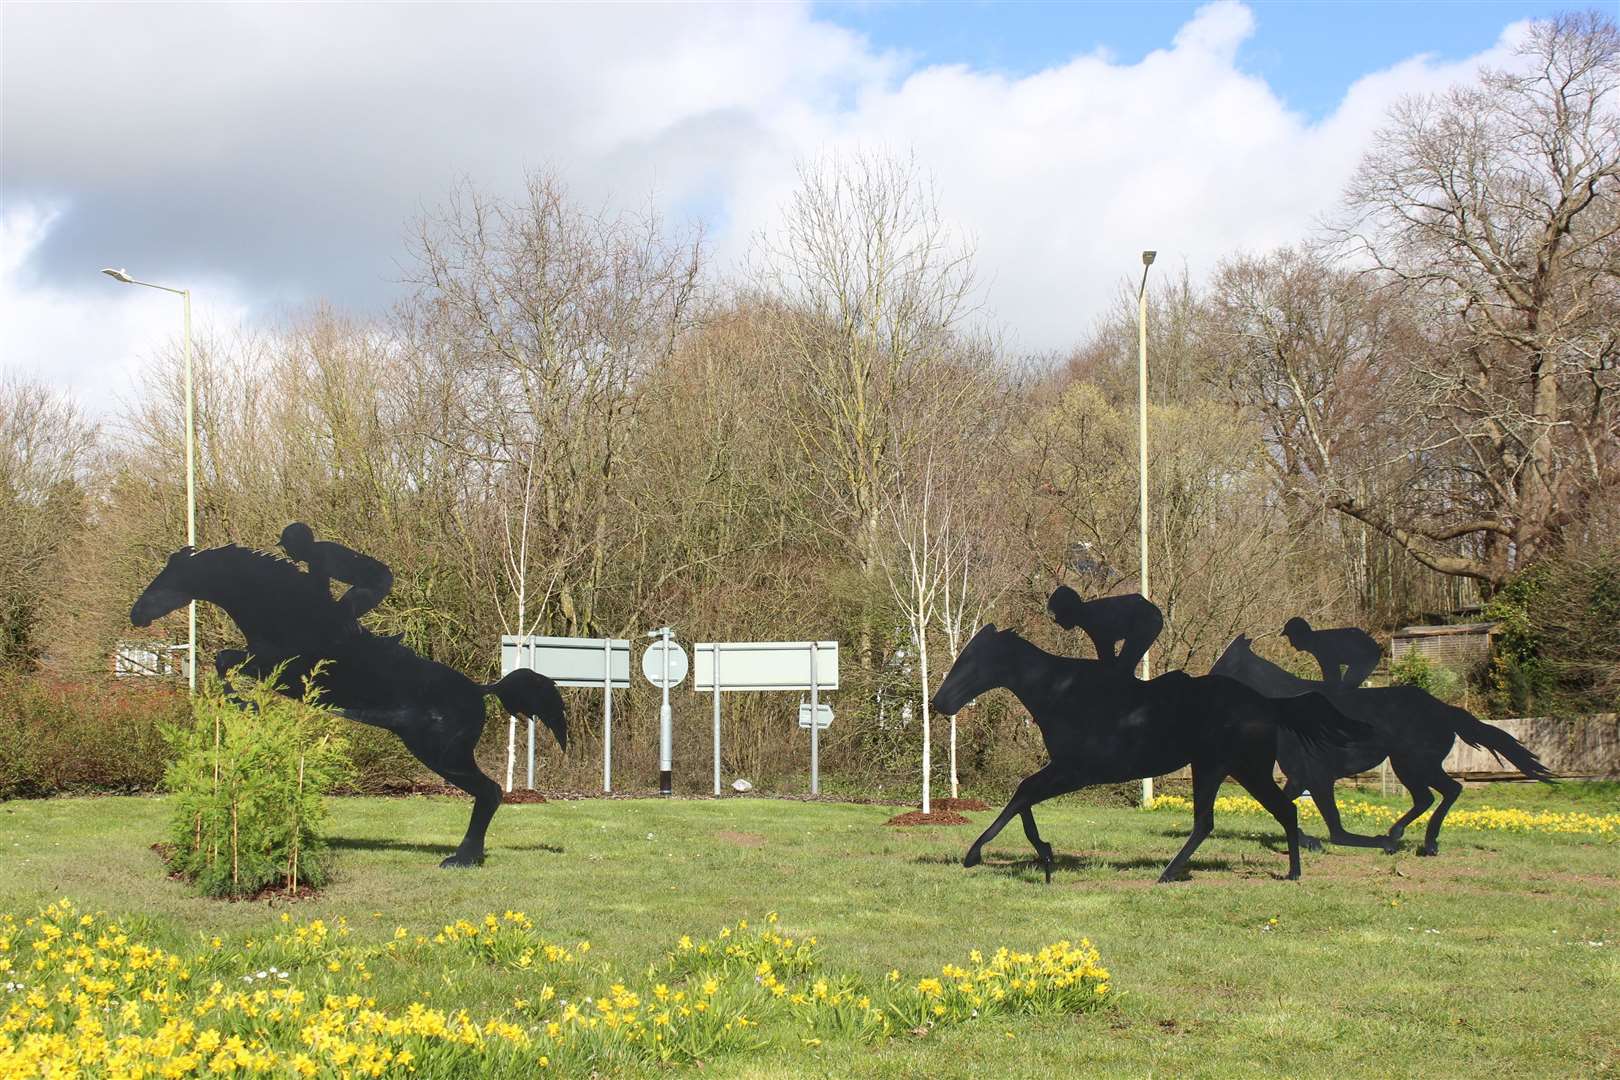 A roundabout on the A20 had horses and shrub 'brush fences' placed on it earlier this year